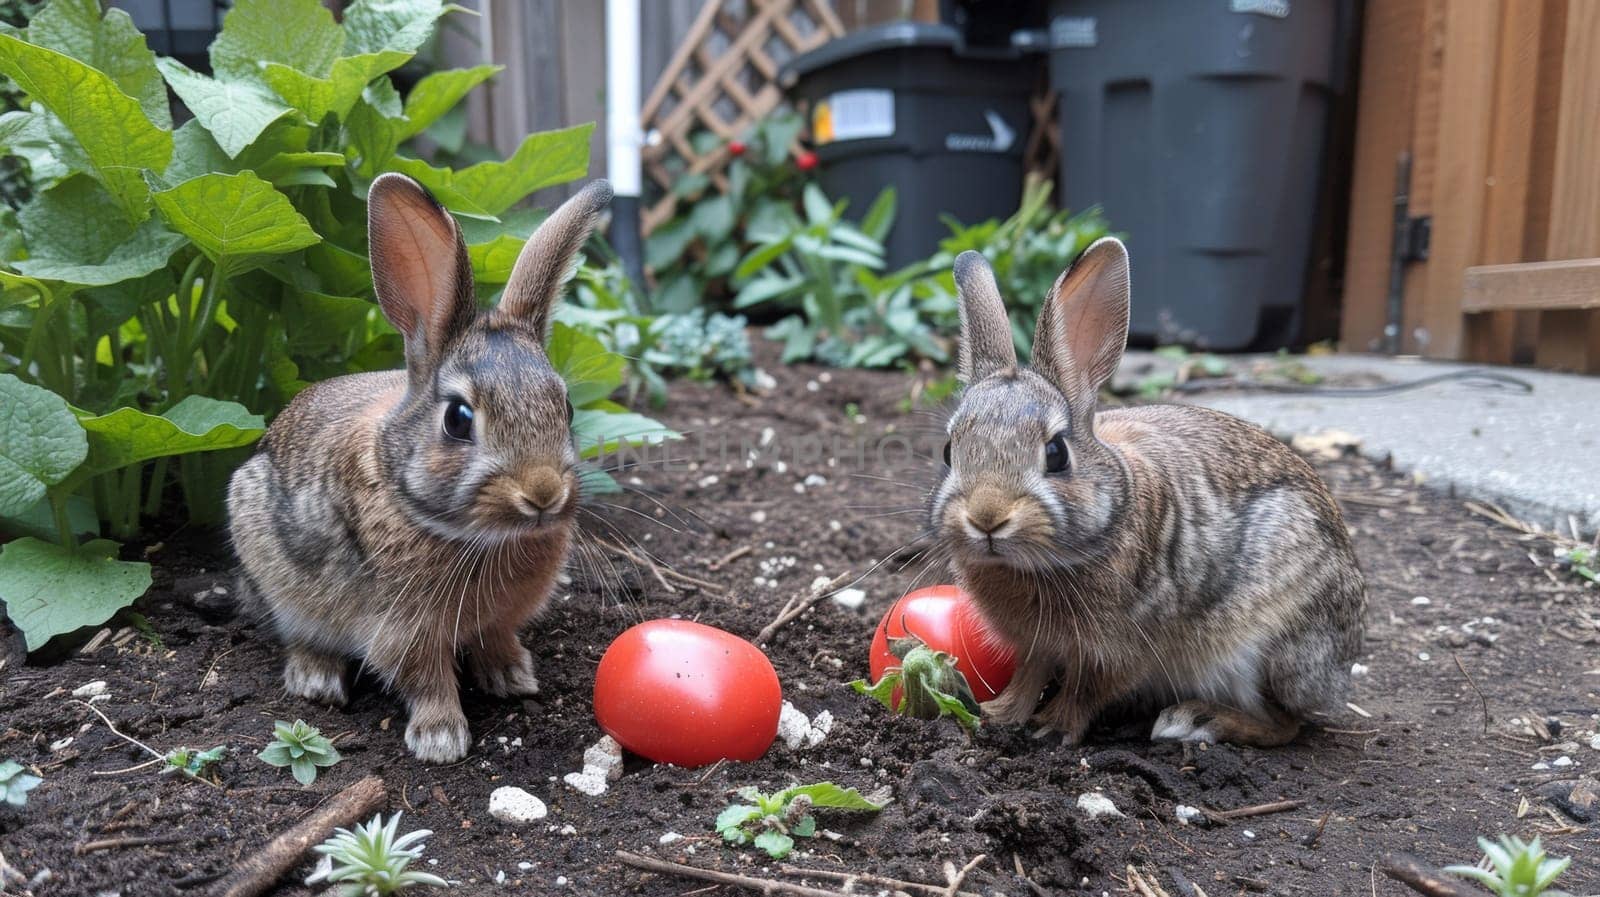 Two rabbits sitting in the dirt next to some tomatoes, AI by starush